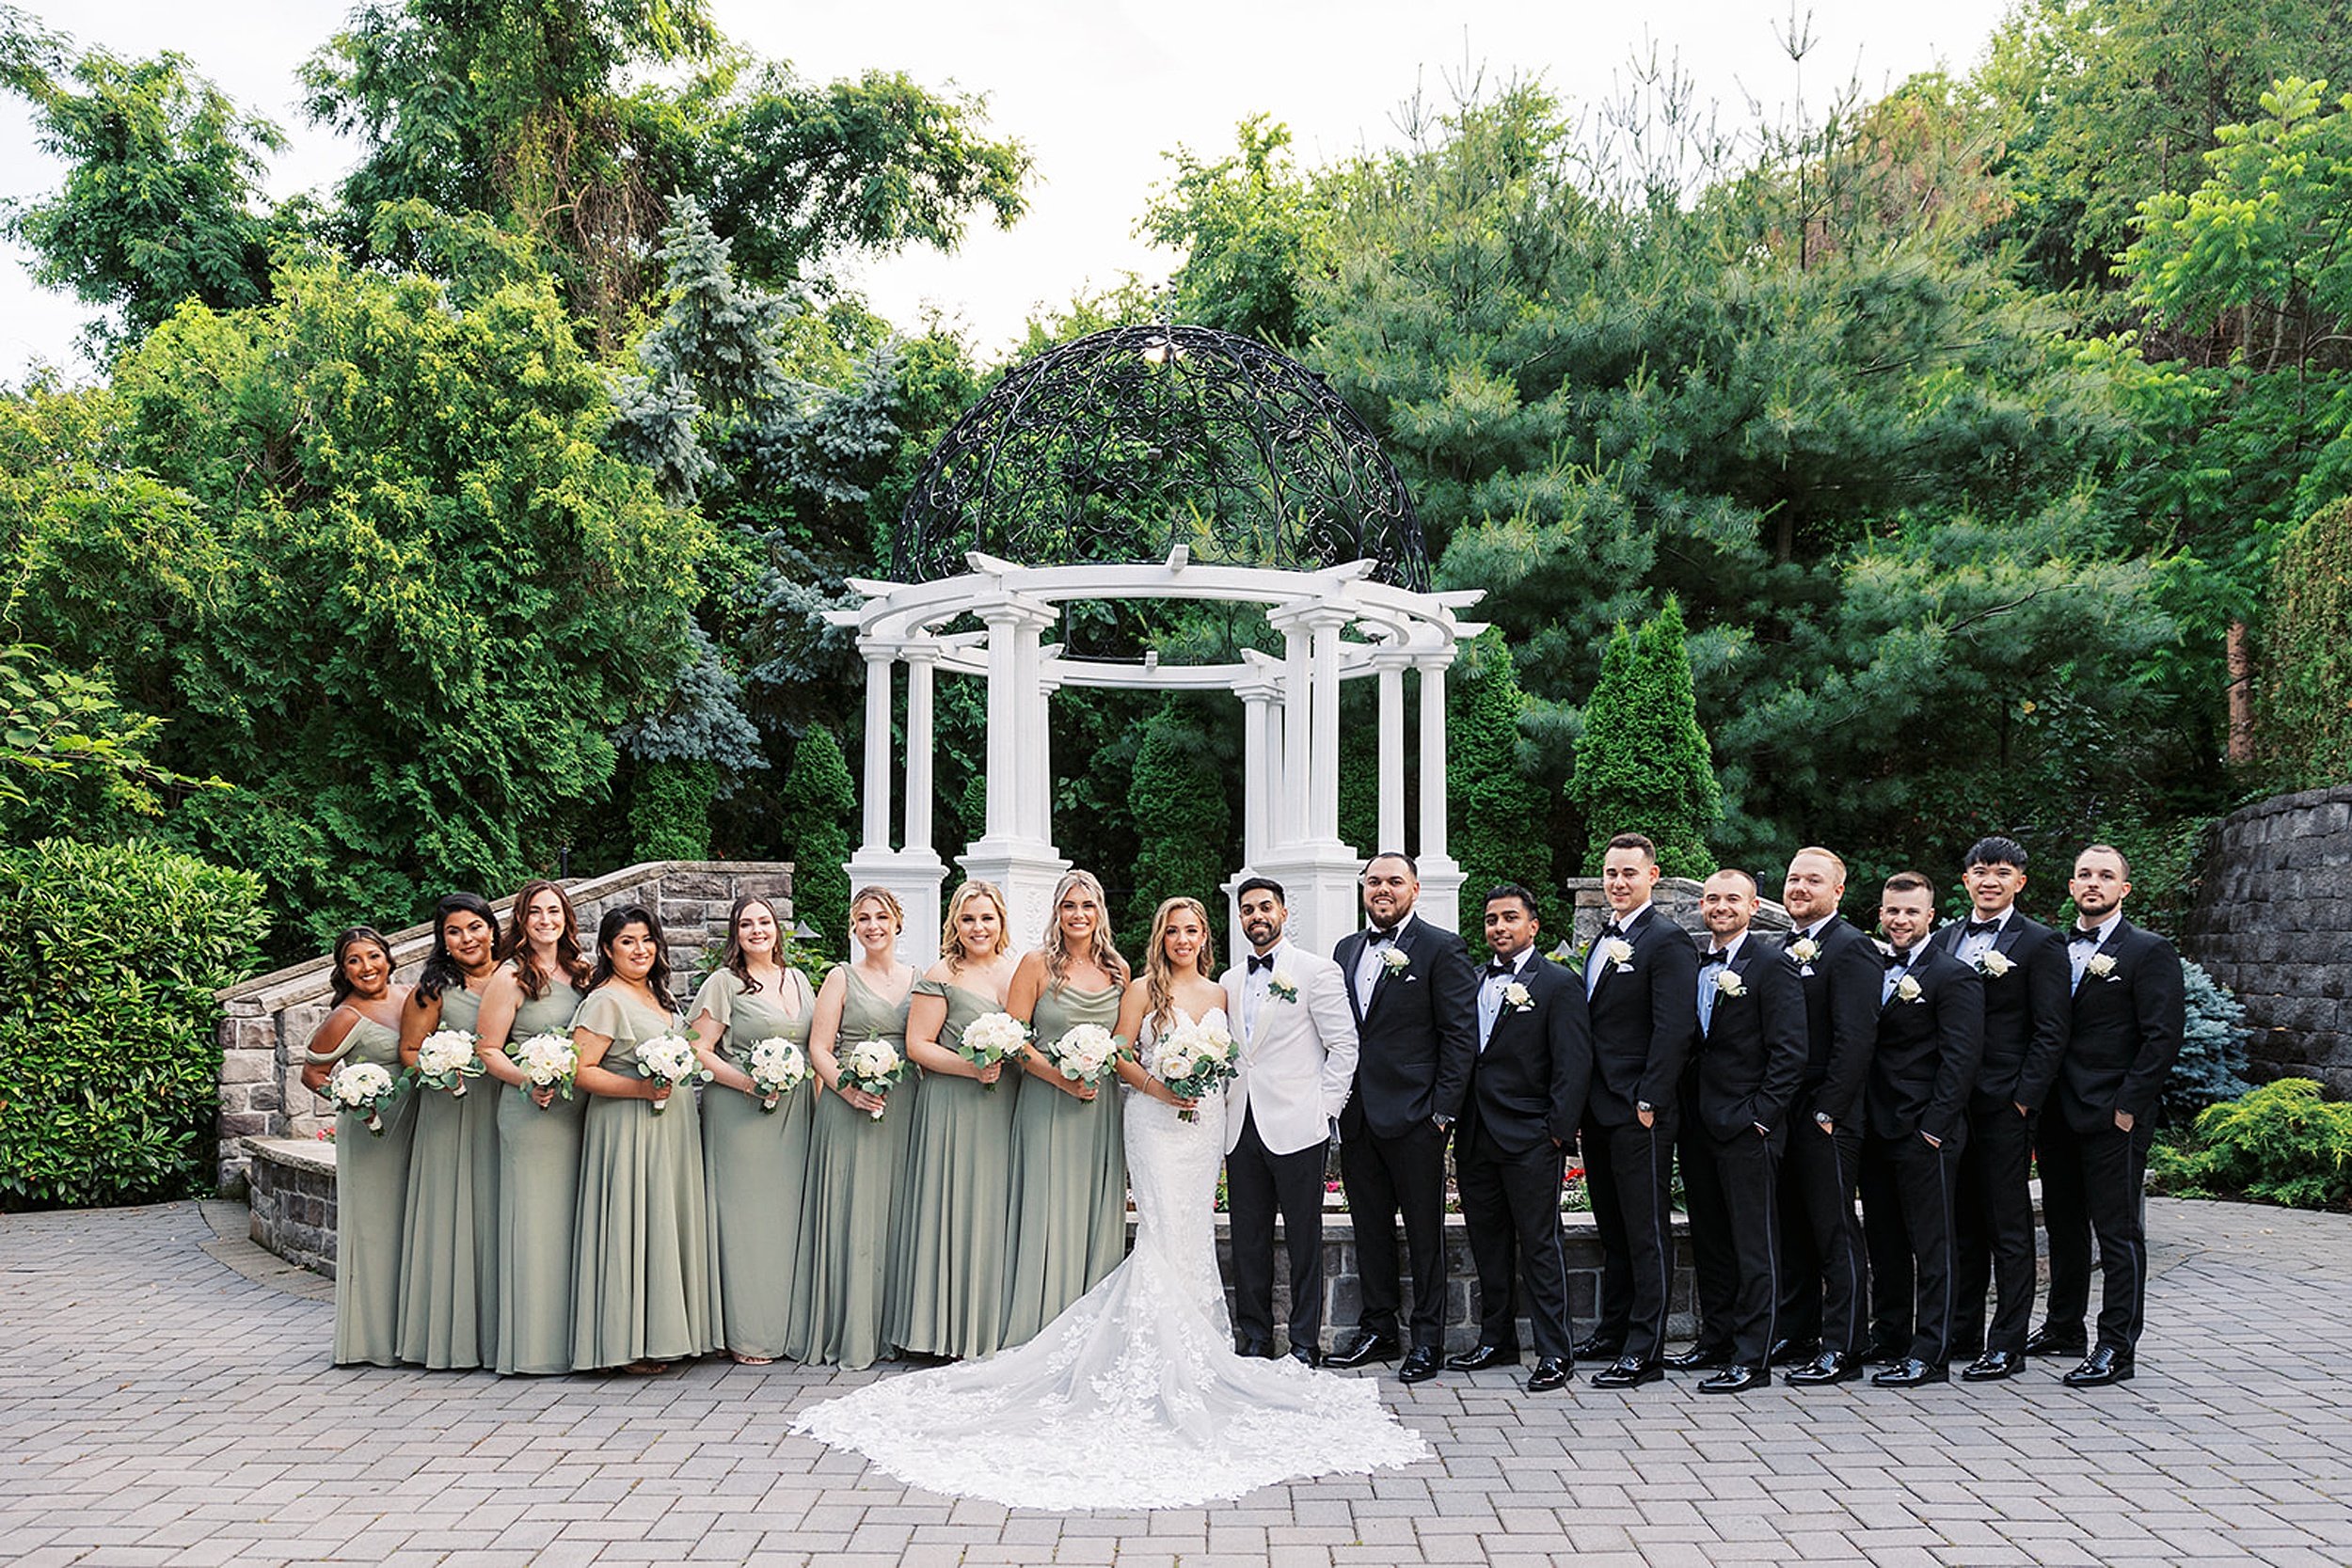 Newlyweds stand in a garden by a gazebo while surrounded by their wedding party